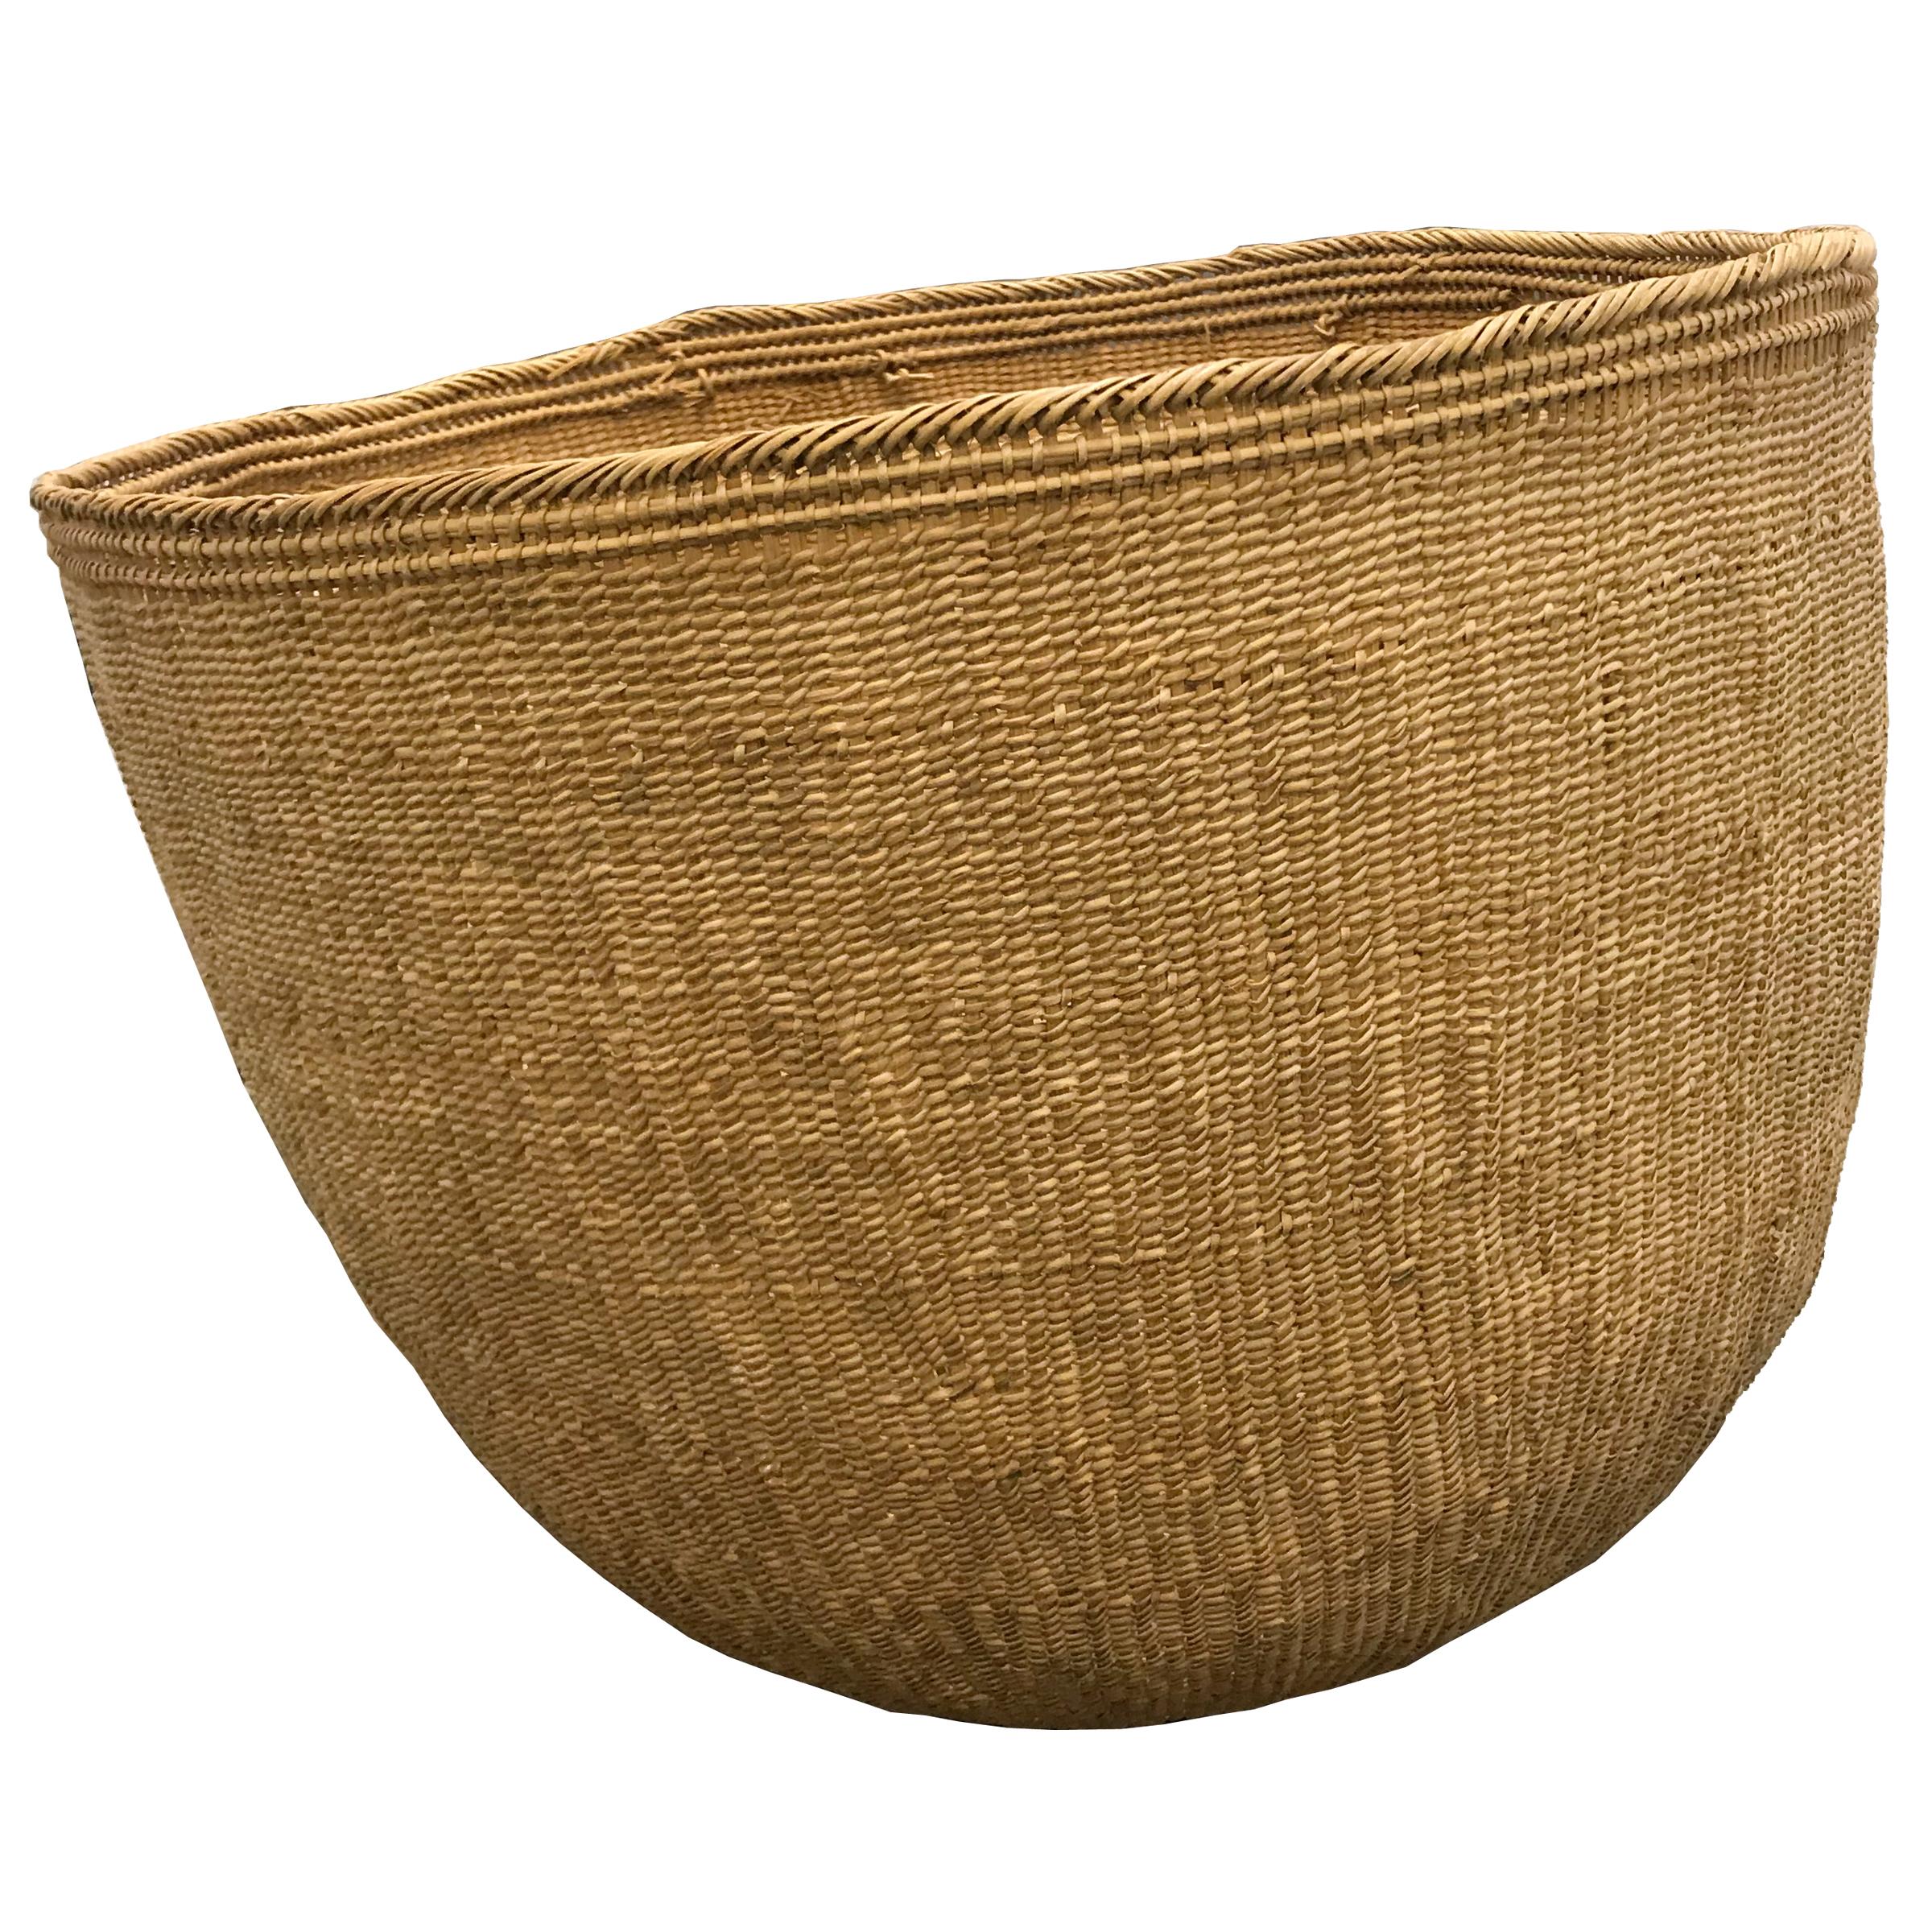 The largest Yanomami basket we've ever seen! The Yanomami are an indigenous people to the Amazonian regions of Brazil and Venezuela. This monumental basket is tightly handwoven of natural fibers with several inner rings for stability, and palm leaf